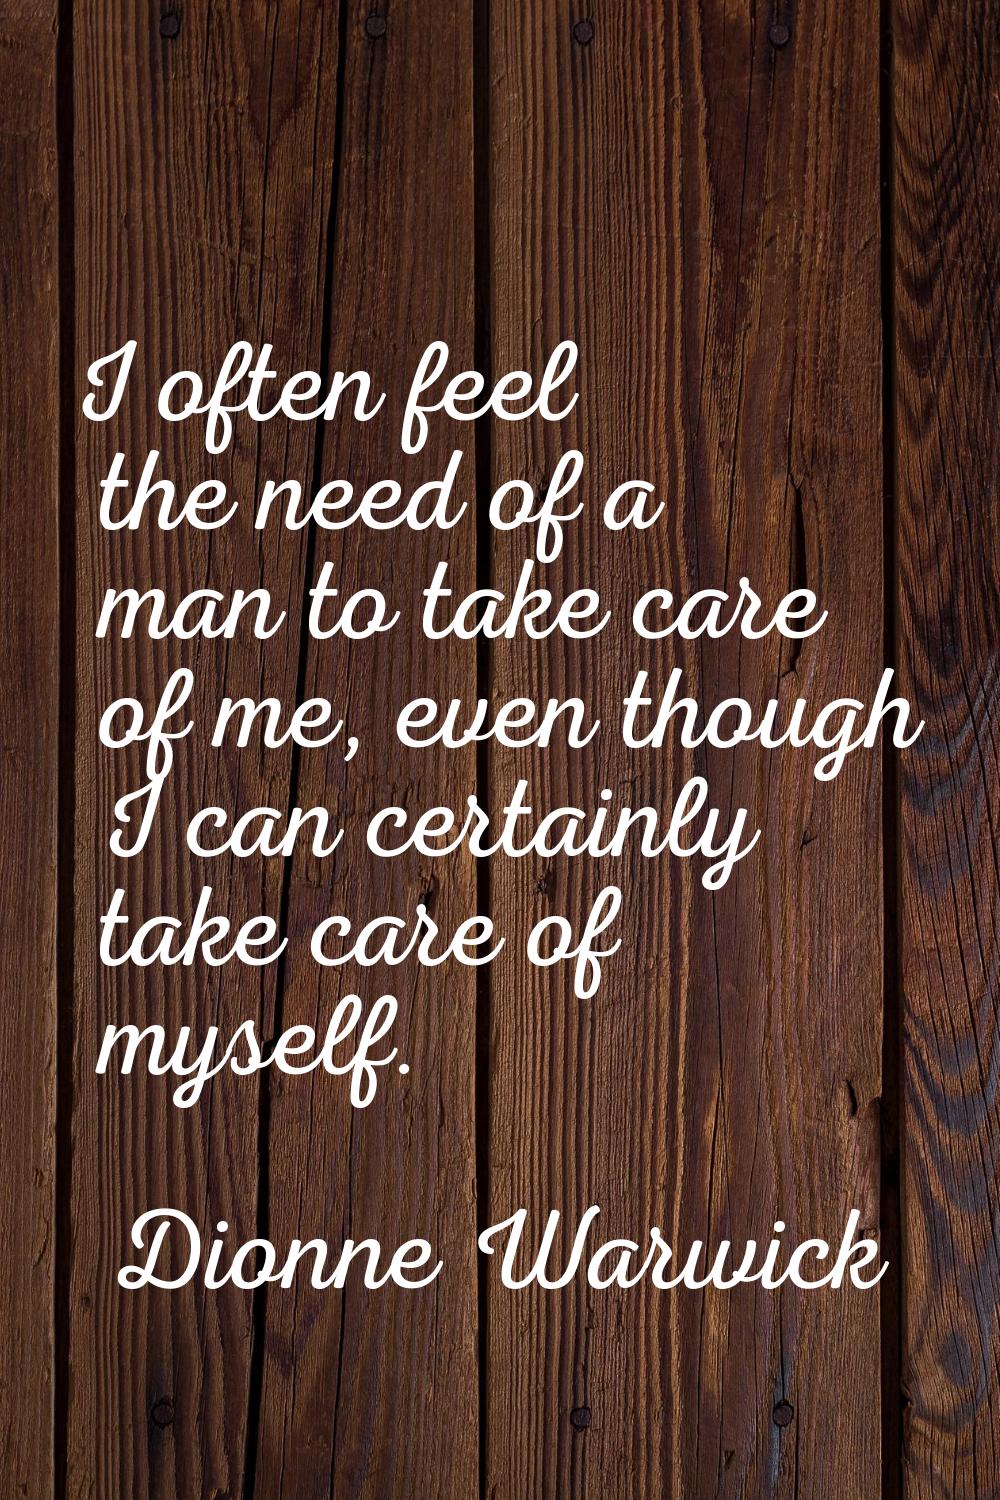 I often feel the need of a man to take care of me, even though I can certainly take care of myself.